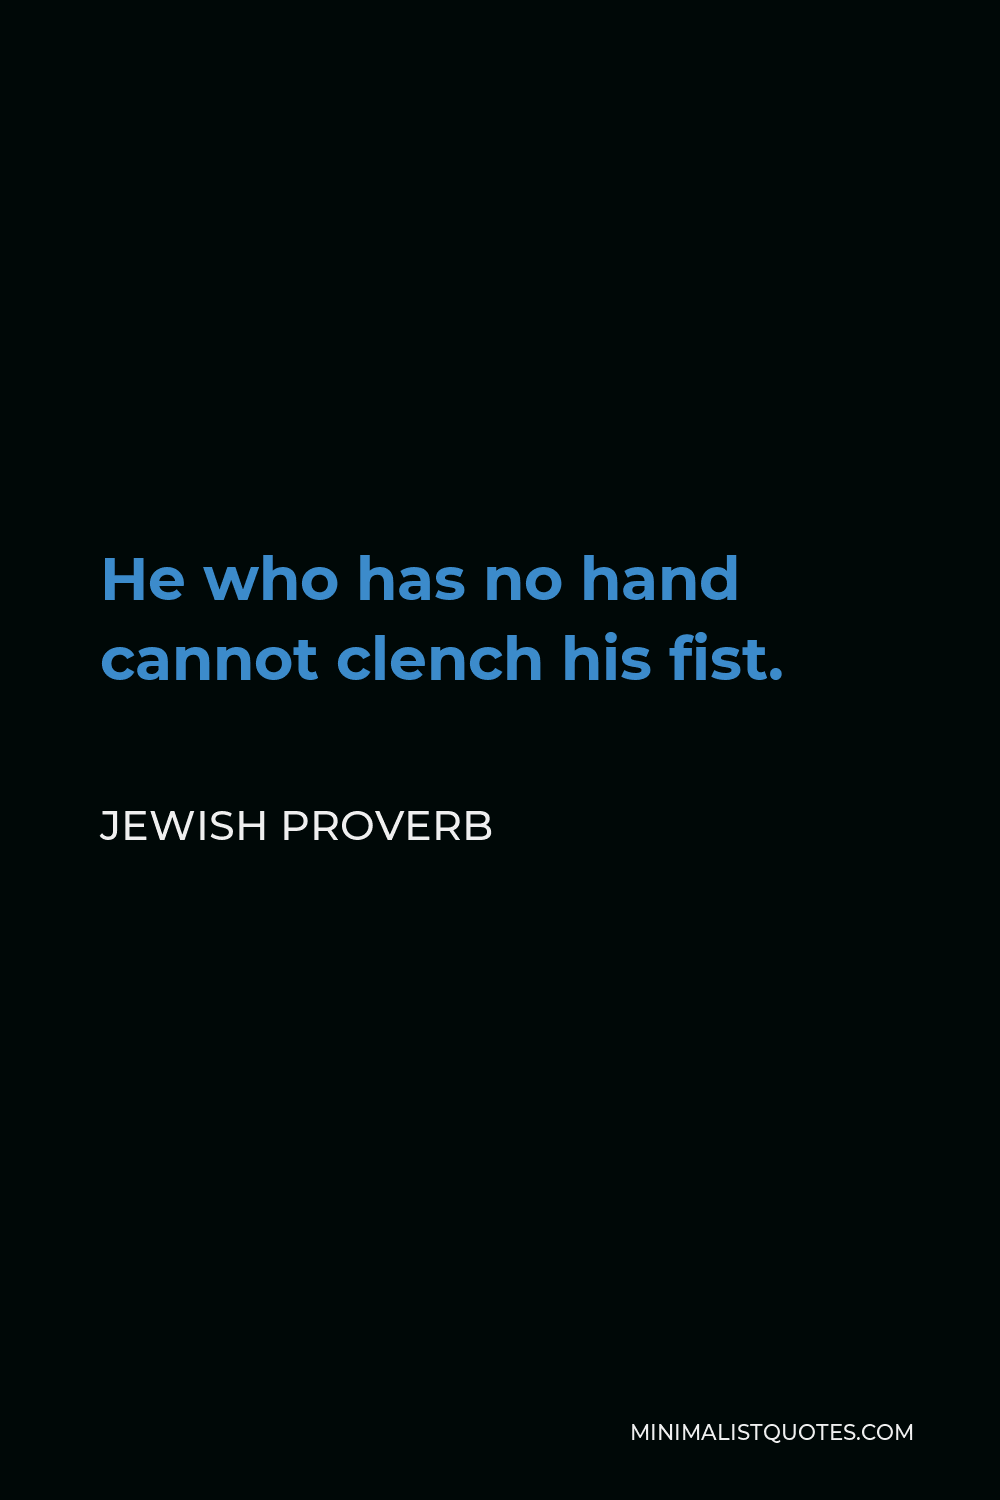 Jewish Proverb Quote - He who has no hand cannot clench his fist.